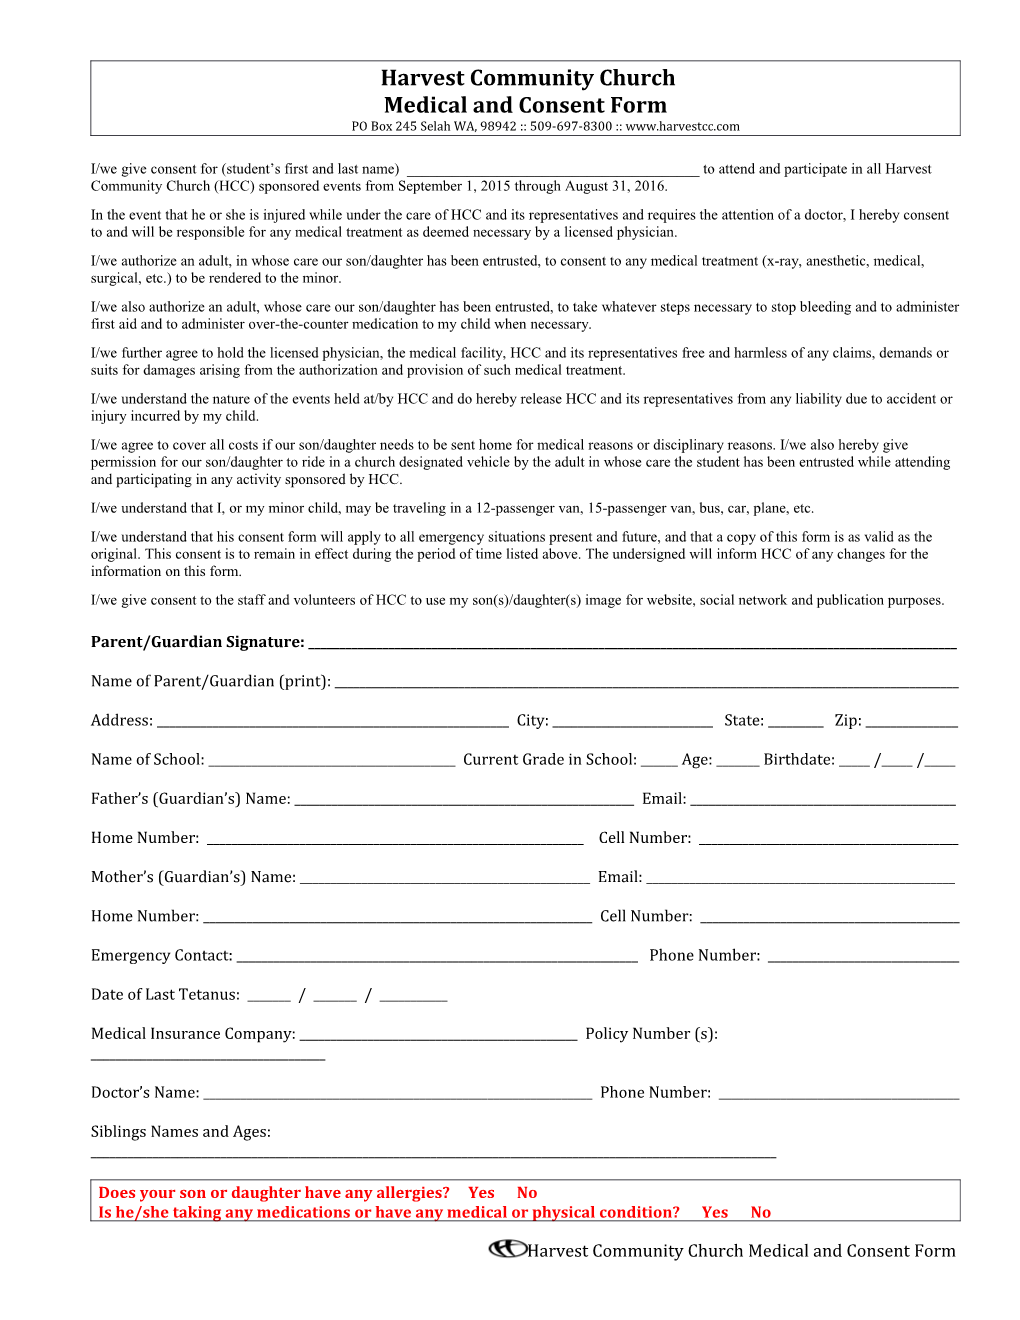 Medical and Consent Form